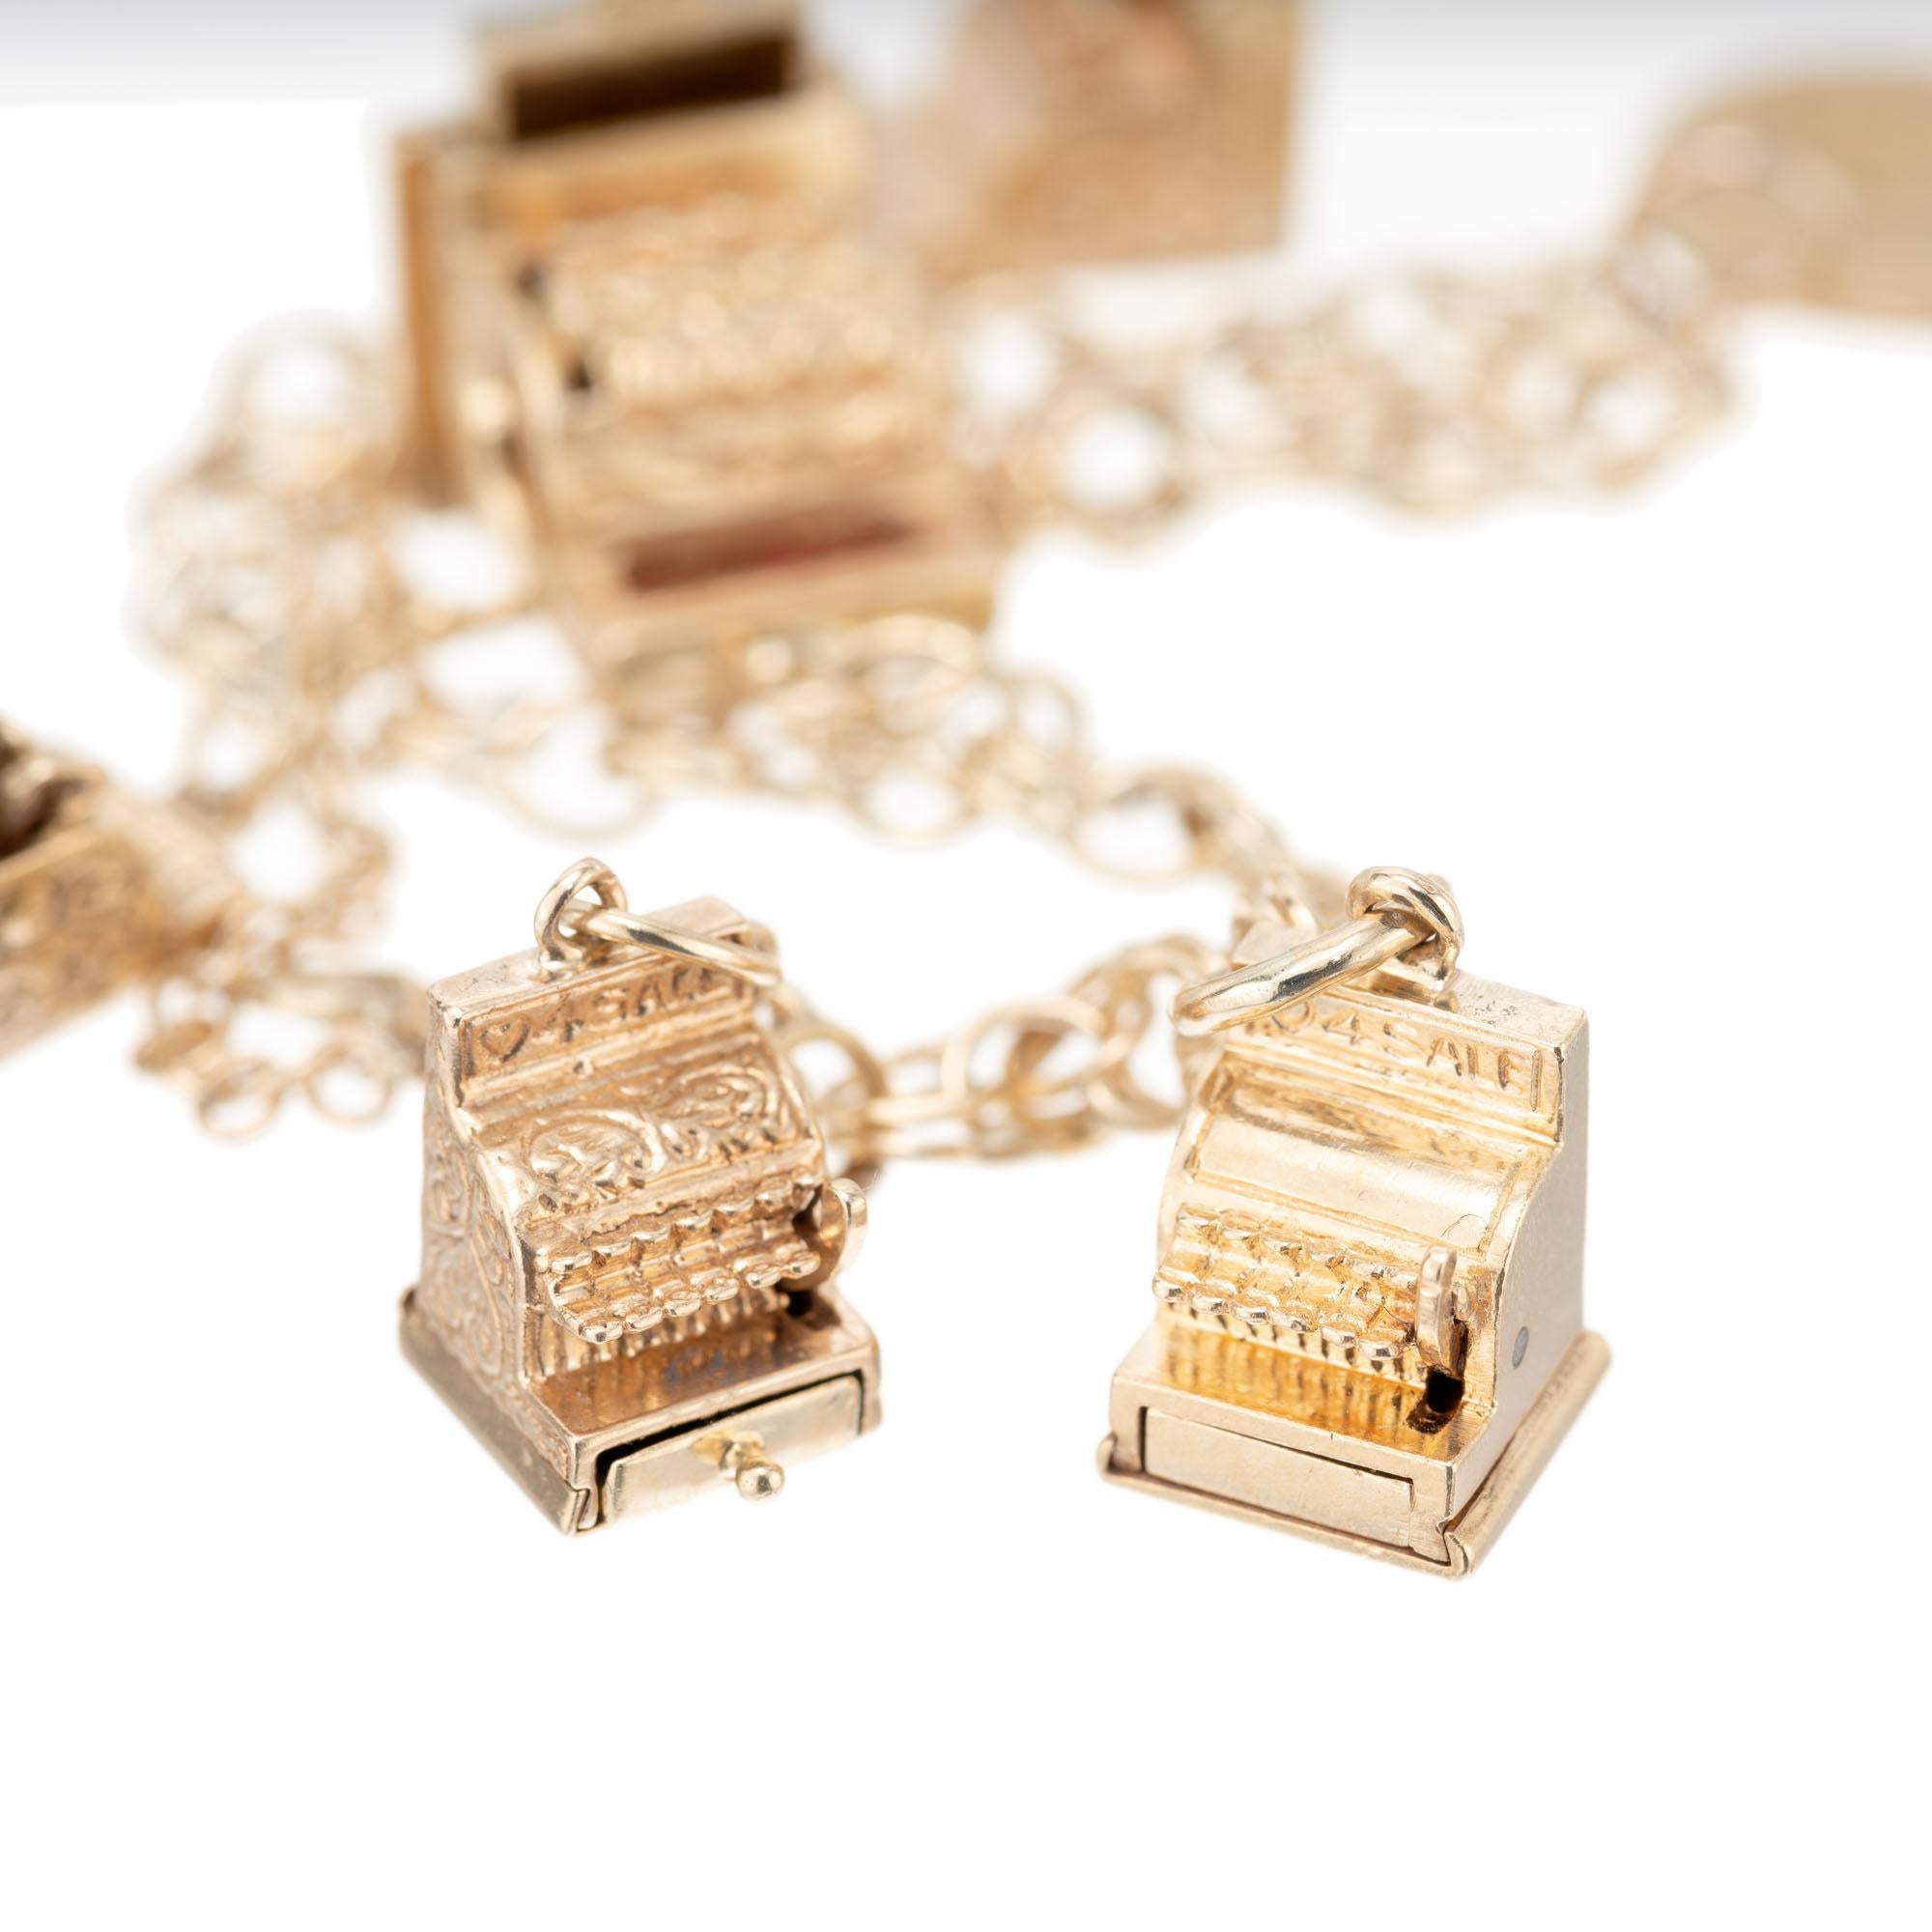 Cash register charm bracelet with five cash registers in solid 14k gold and a US gold coin on a double spiral link bracelet. 7 inches. 

5 cash register charms 
1 US coin
14k yellow gold 
Stamped: 14k
33.0 grams
Bracelet: 7 Inches
Width: 5.5mm